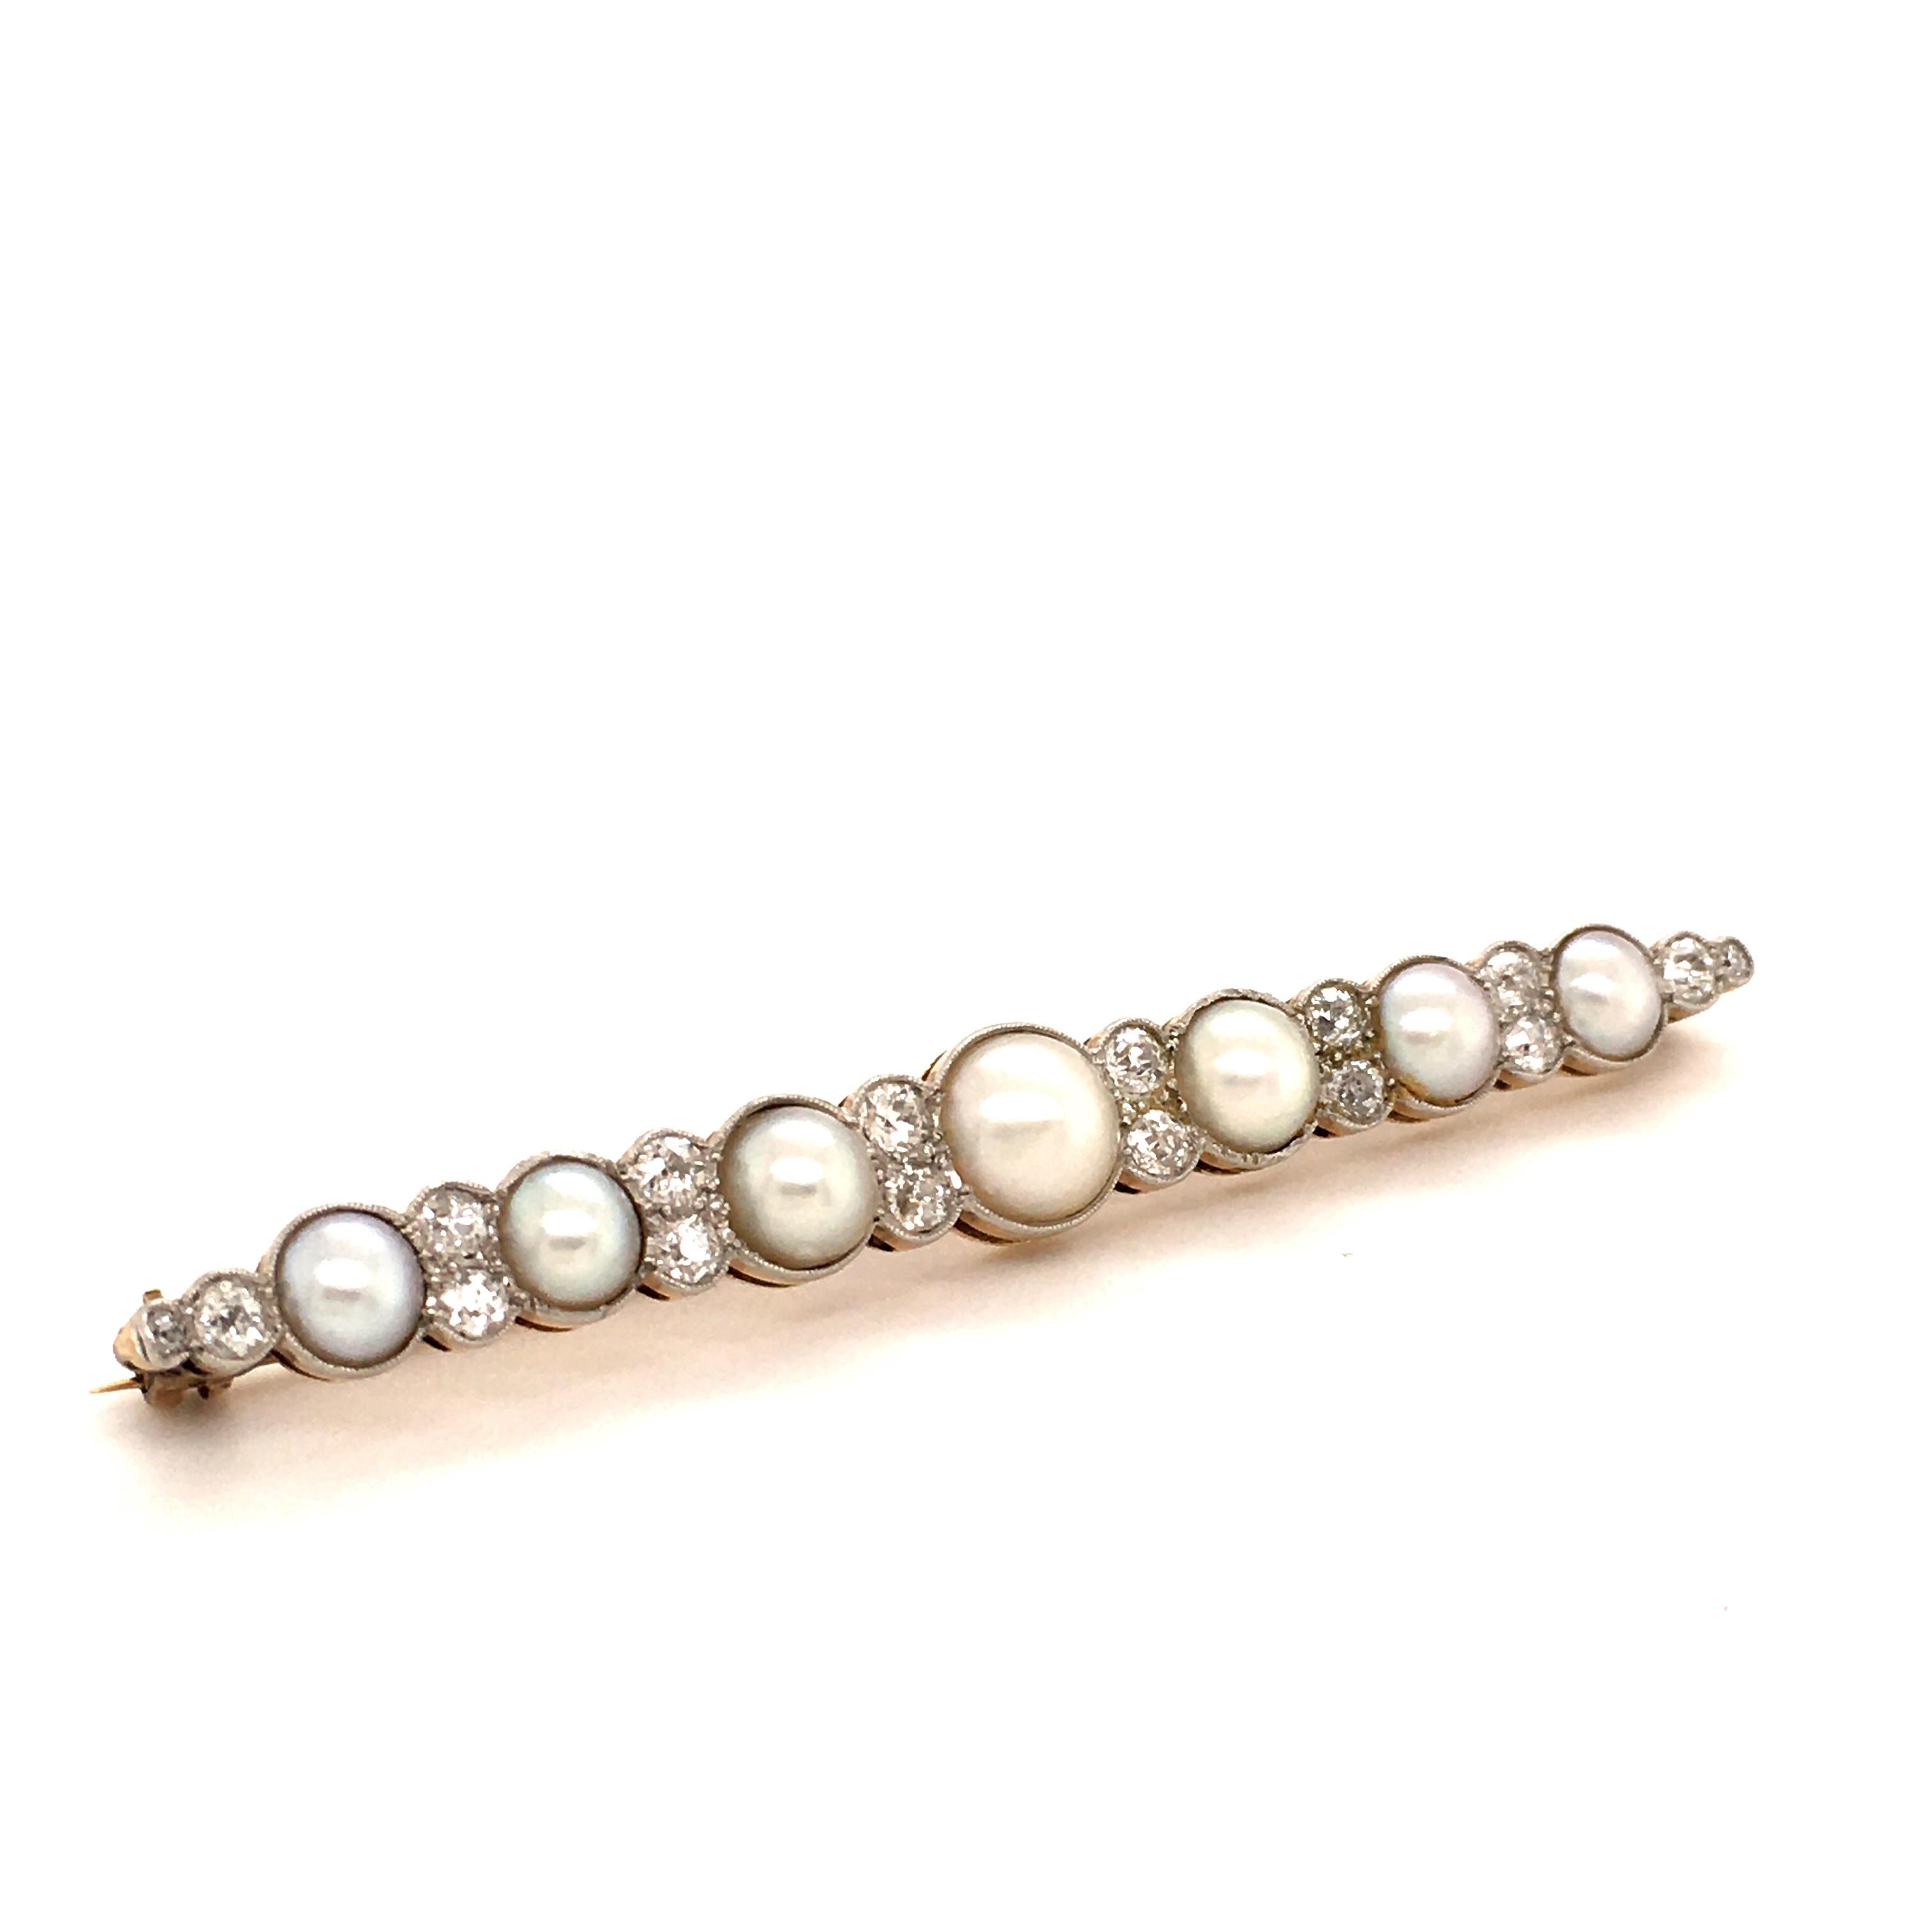 7 beautiful shining white coloured natural half pearls with a bright luster and a clean surface are surrounded by 16 old cut diamonds totalling approximate 3.00 ct set with mill grain decoration.
The base is worked in 14K yellow gold and is topped